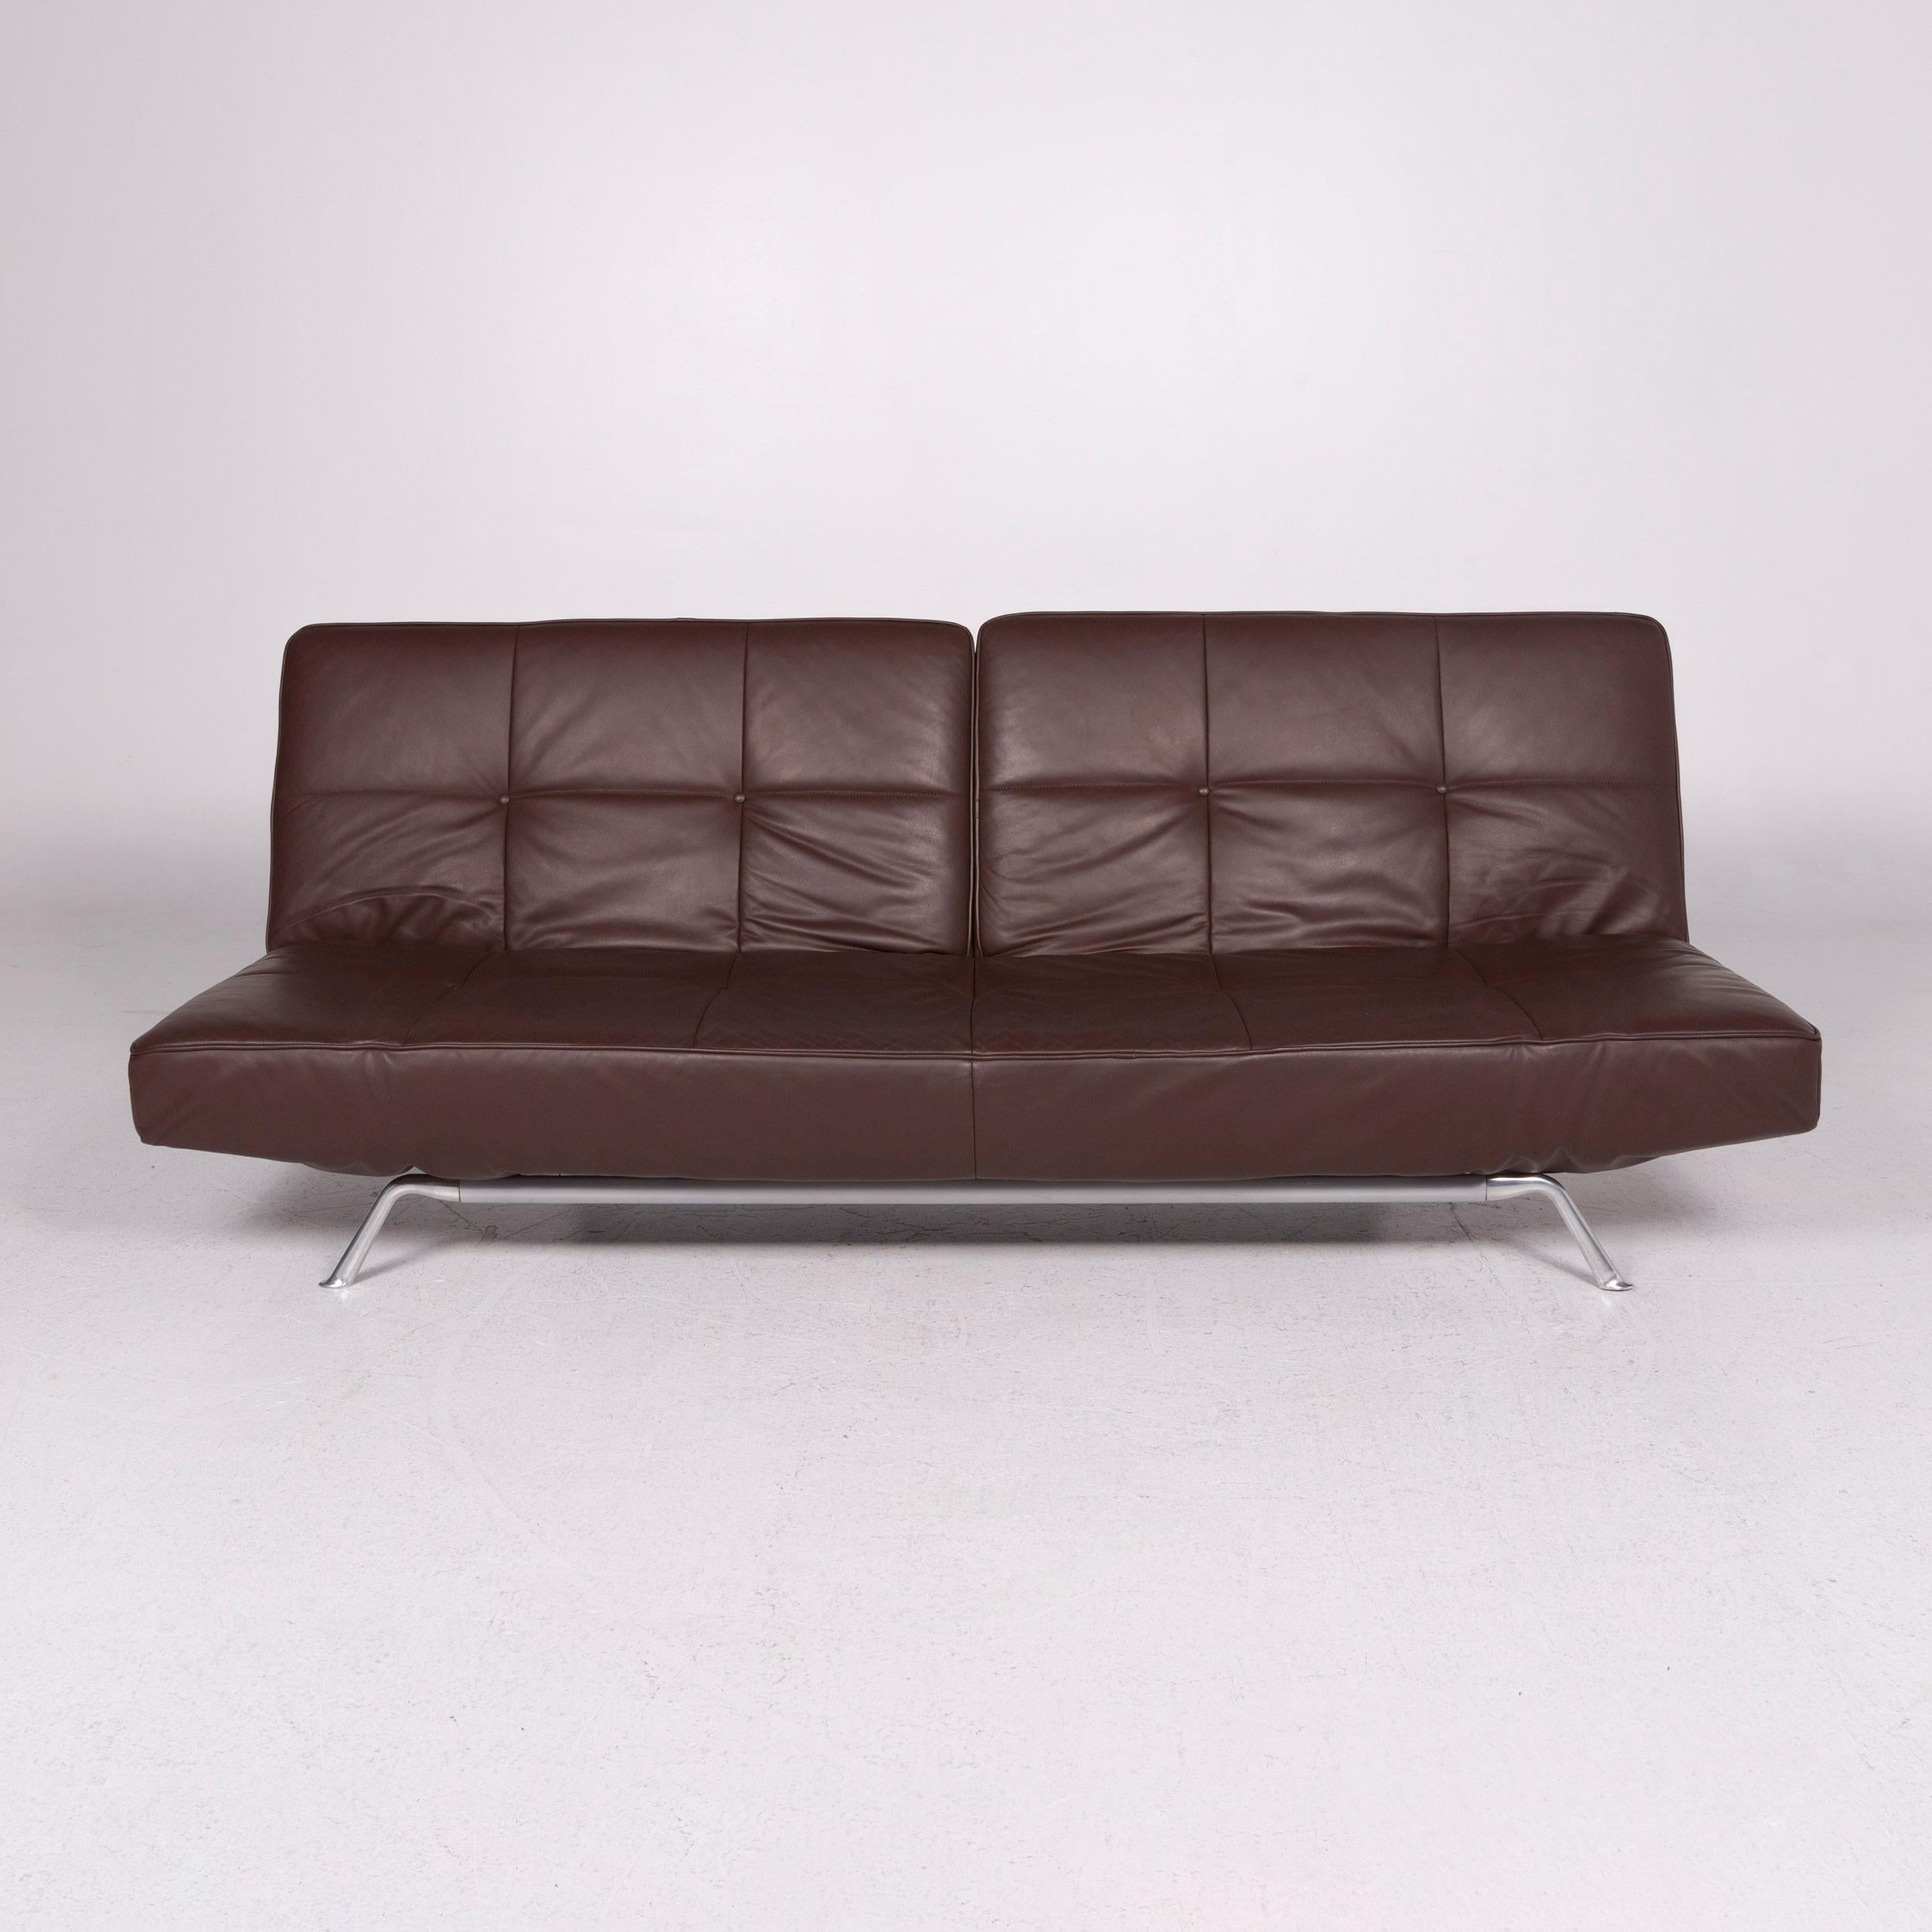 We bring to you a Ligne Roset Smala leather sofa brown three-seat function couch.


 Product measurements in centimeters:
 

Depth 117
Width 200
Height 72
Seat-height 40
Rest-height 63
Seat-depth 58
Seat-width 145
Back-height 45.
 